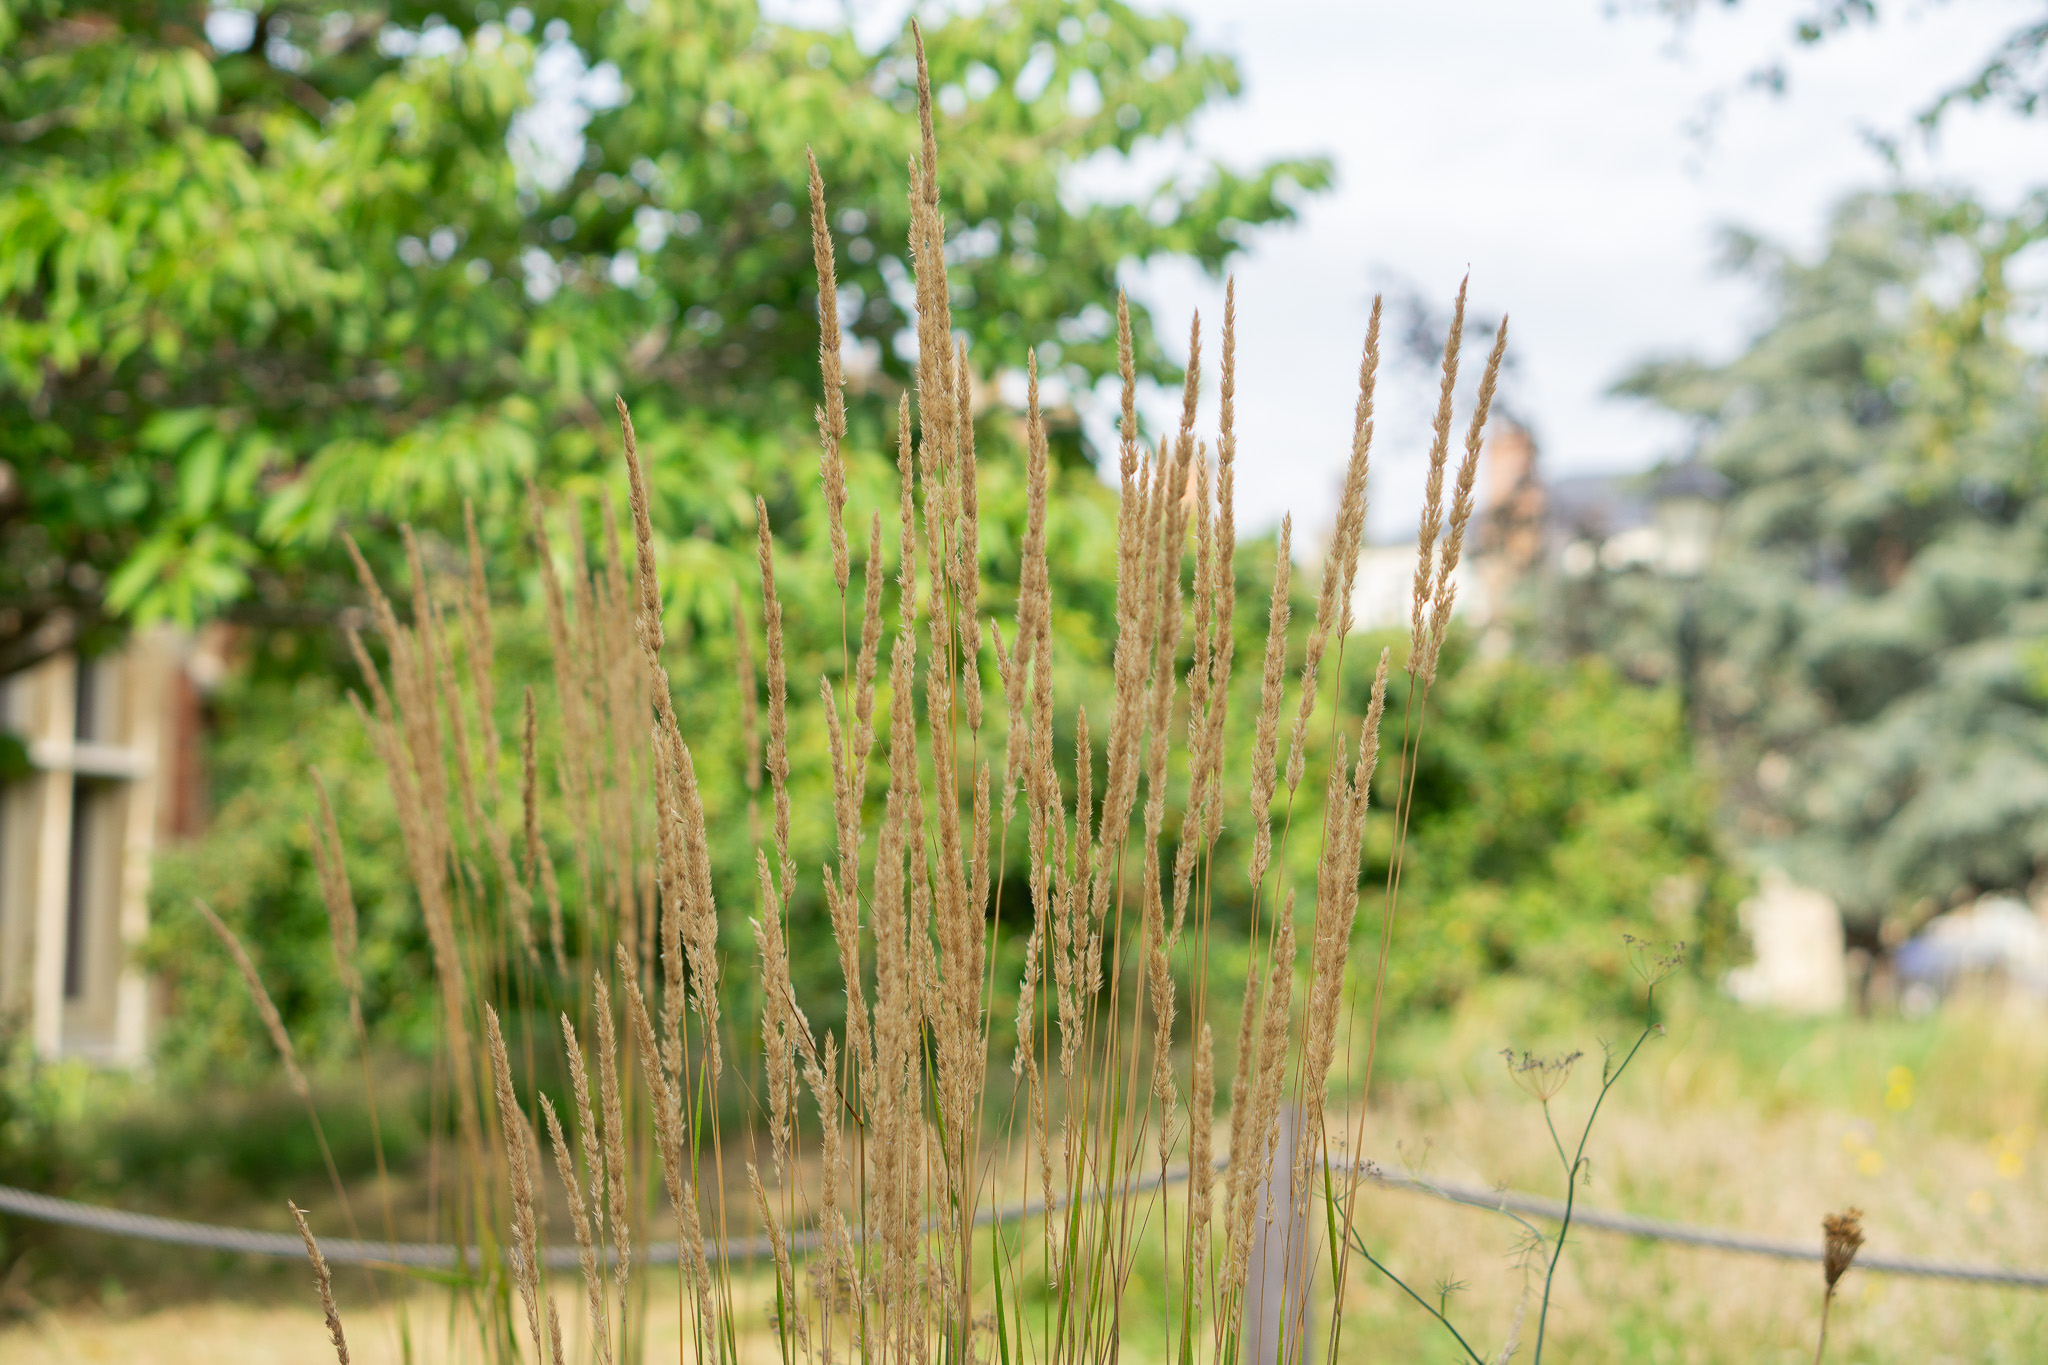 As the summer draws to a close, grasses begin to flourish